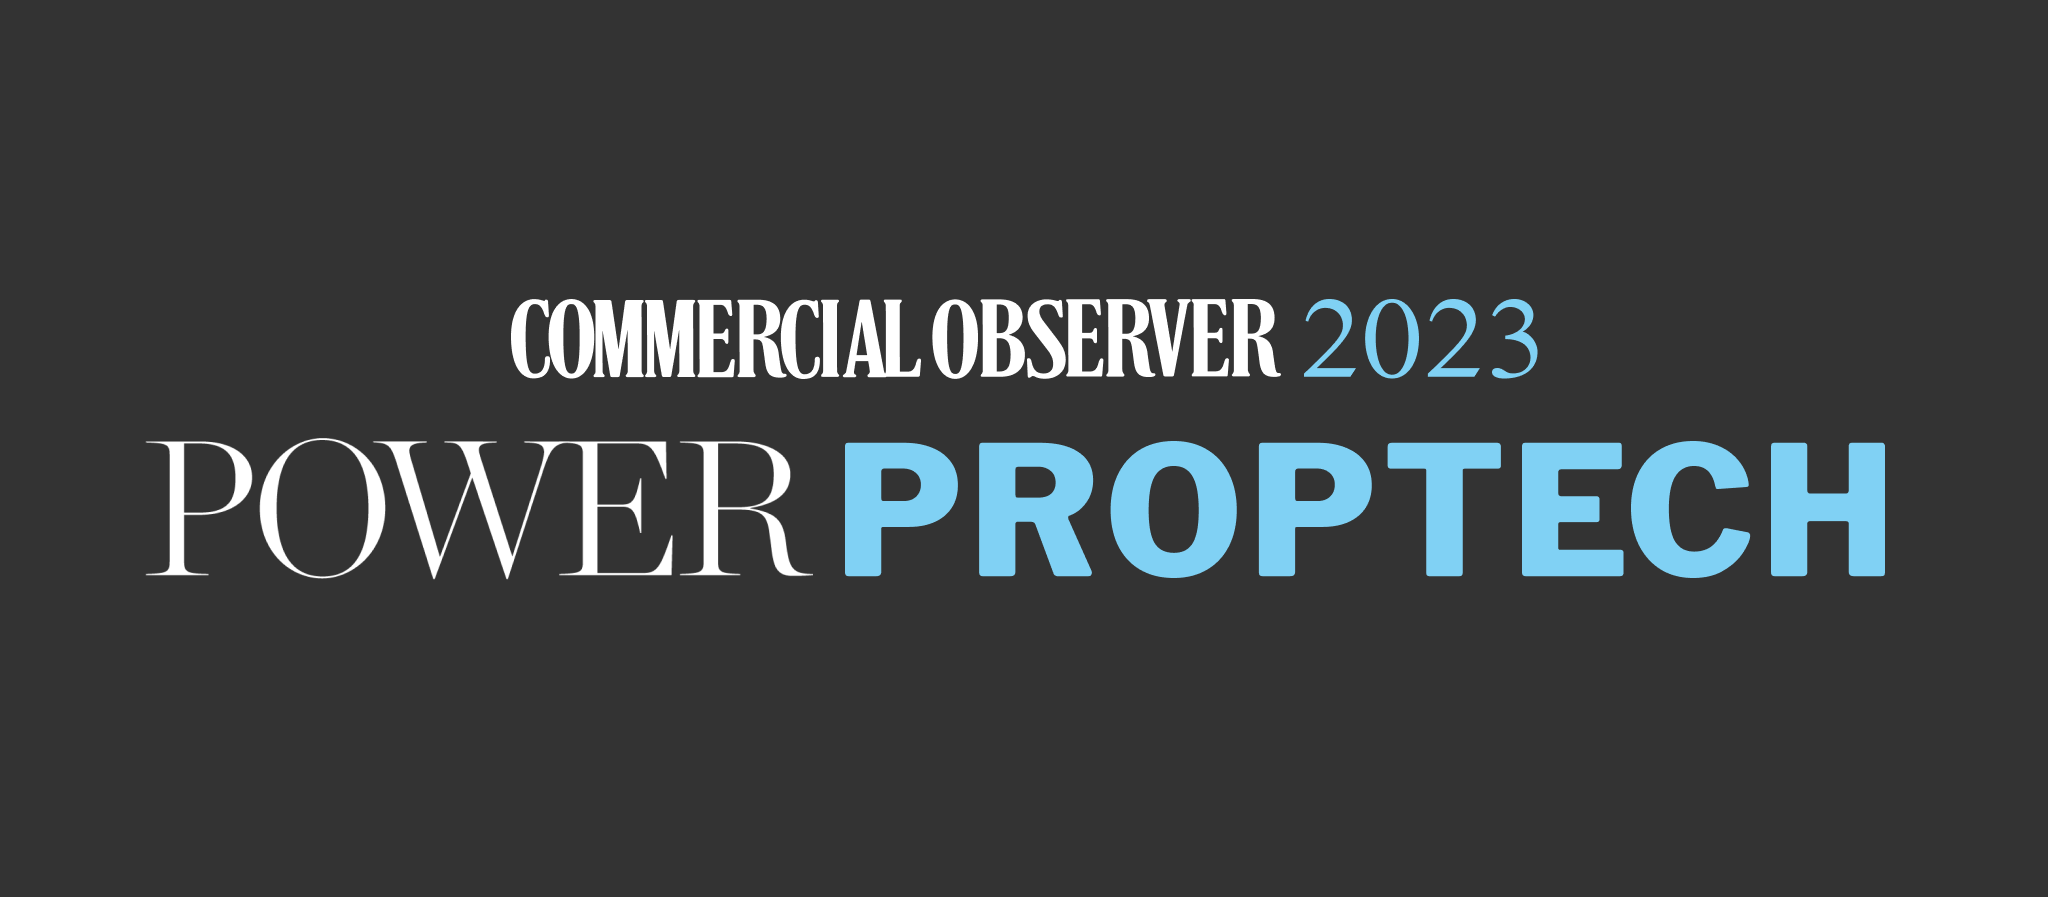 Power PropTech 2023 Featured Image